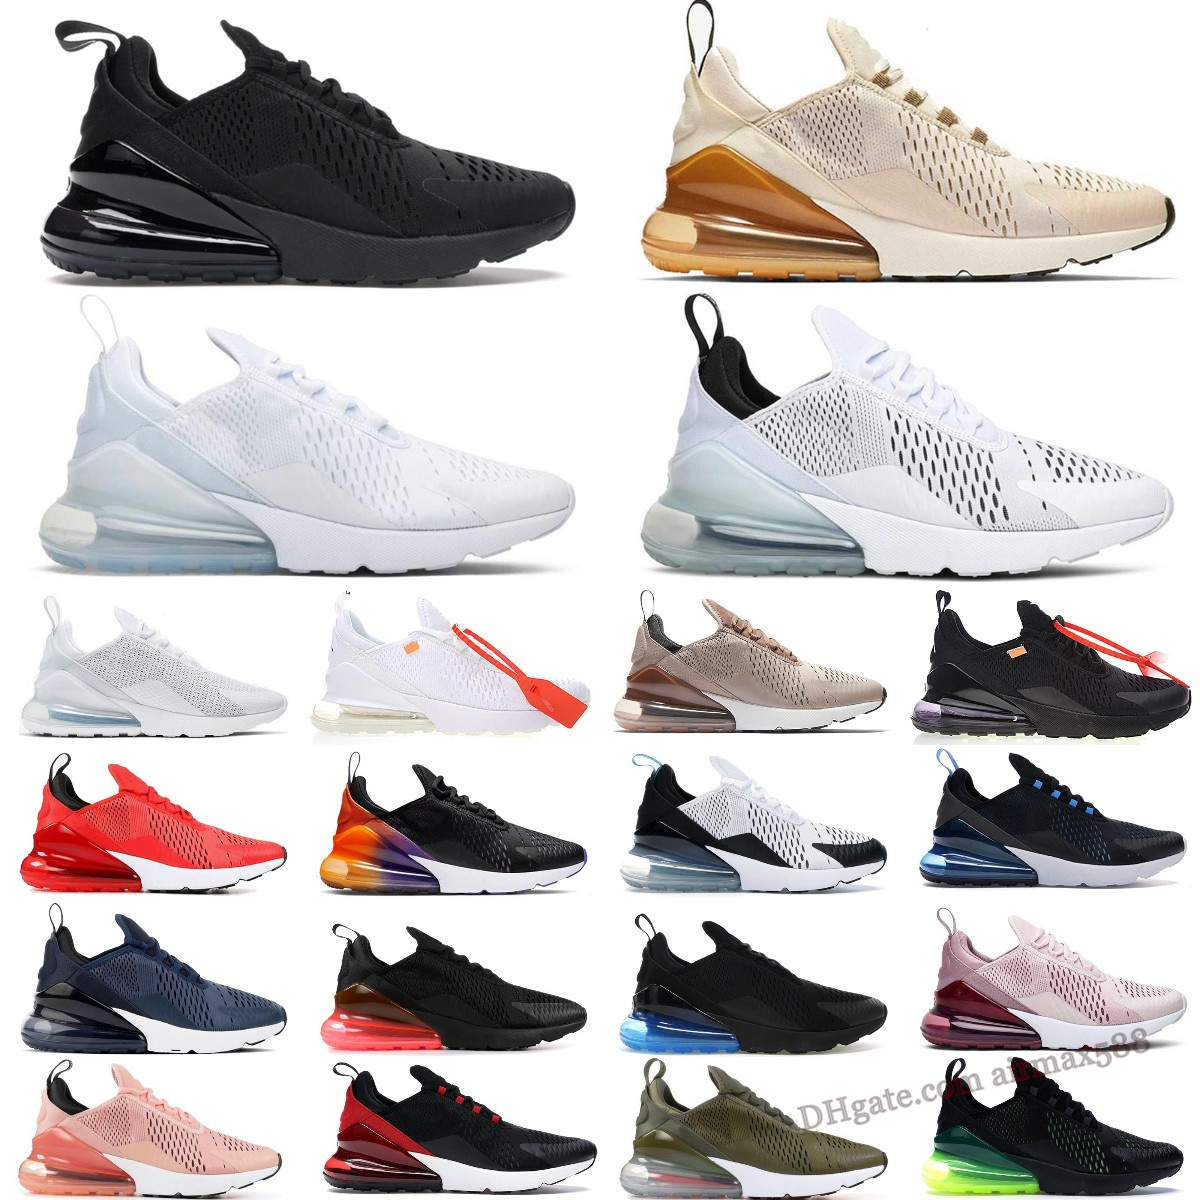 

2023 with box air Sports 270 Running Shoes Triple Black White University Red Barely Rose New Quality Platinum Volt max 27C 270s Men Women Tennis Trainers Sneakers 36-45, Please contact us for more colors